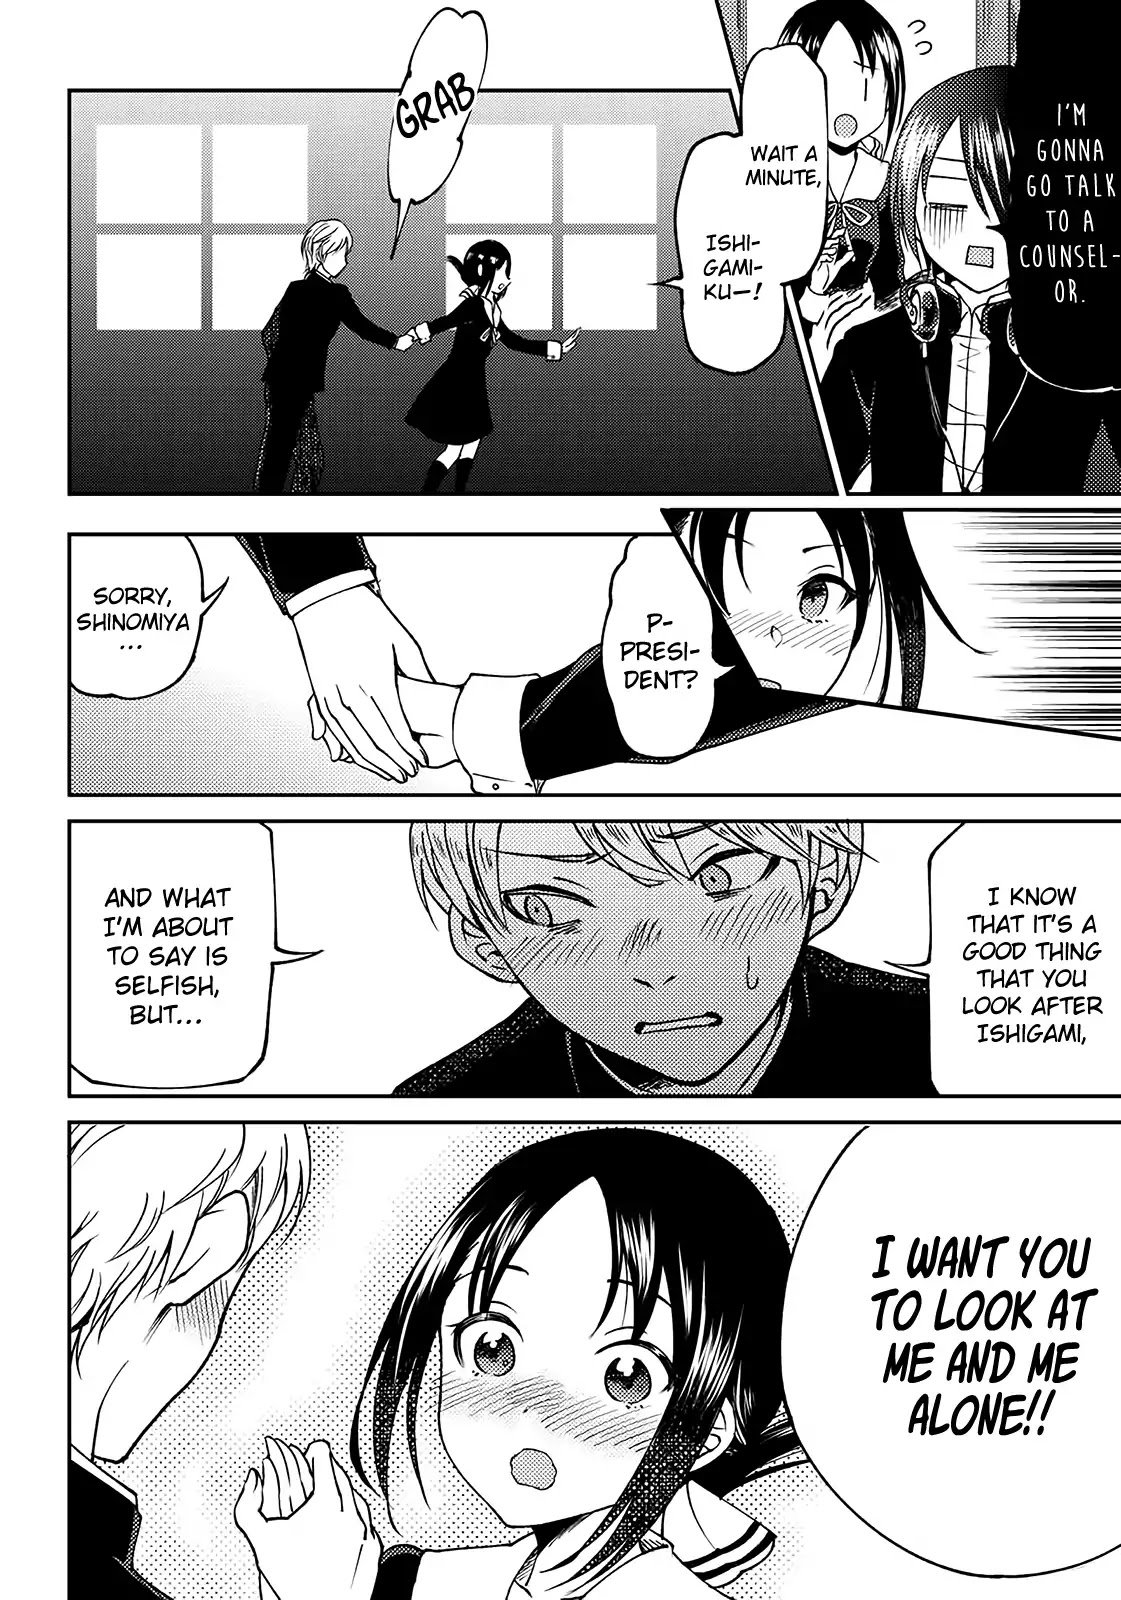 kaguya-wants-to-be-confessed-to-official-doujin-chap-3-13